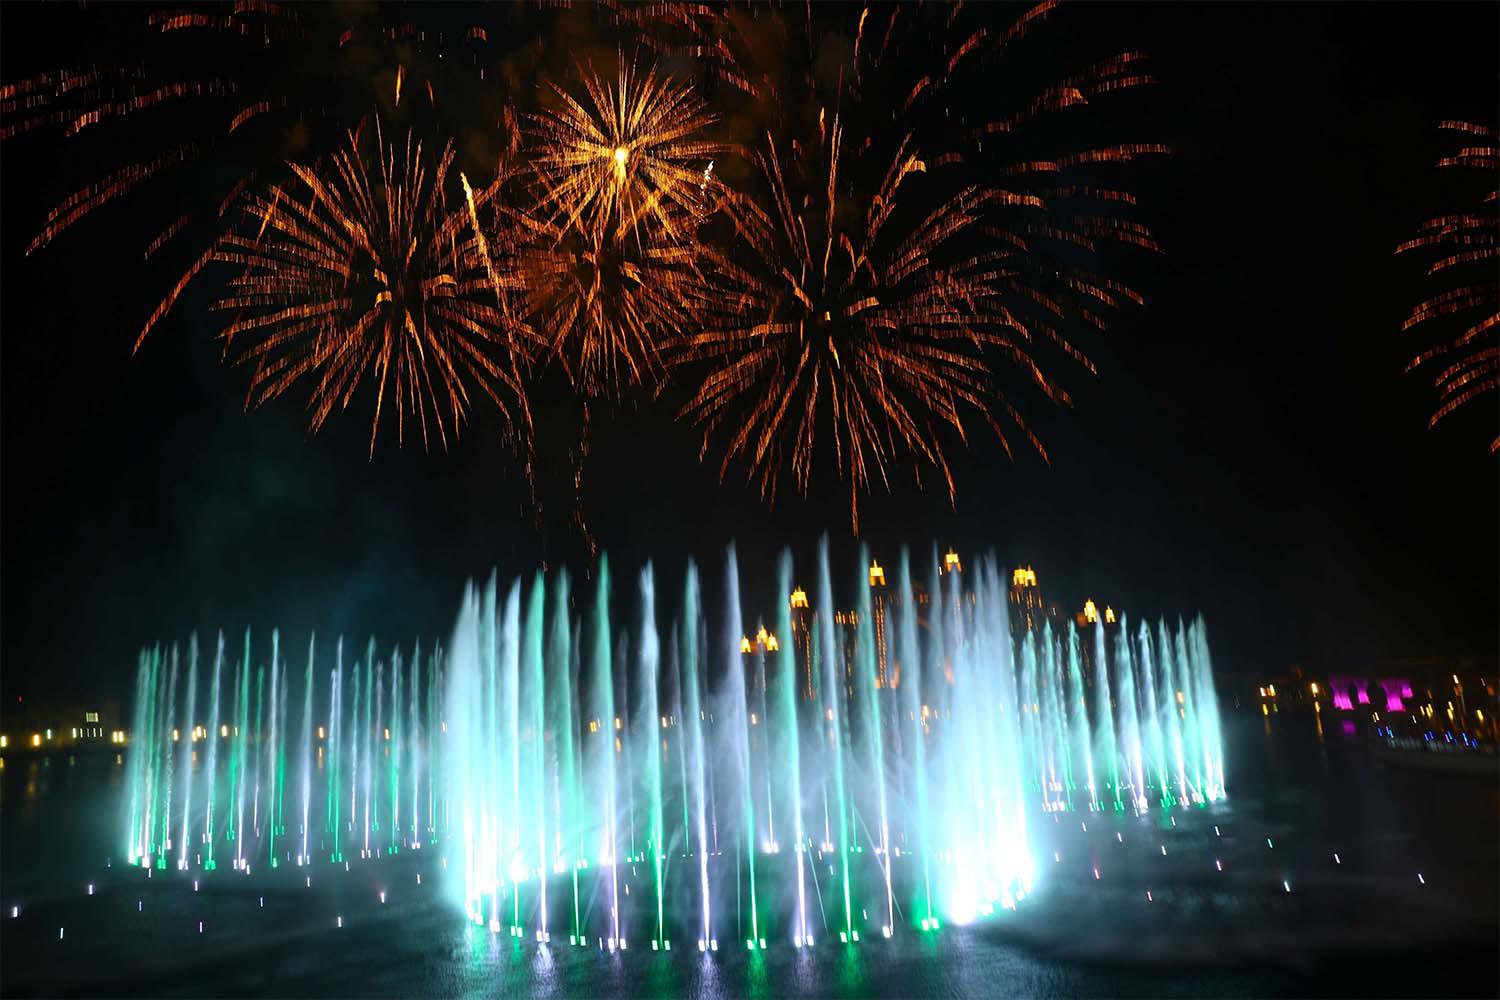 Palm Fountain features 128 super shooters reaching up to 105 metres in height